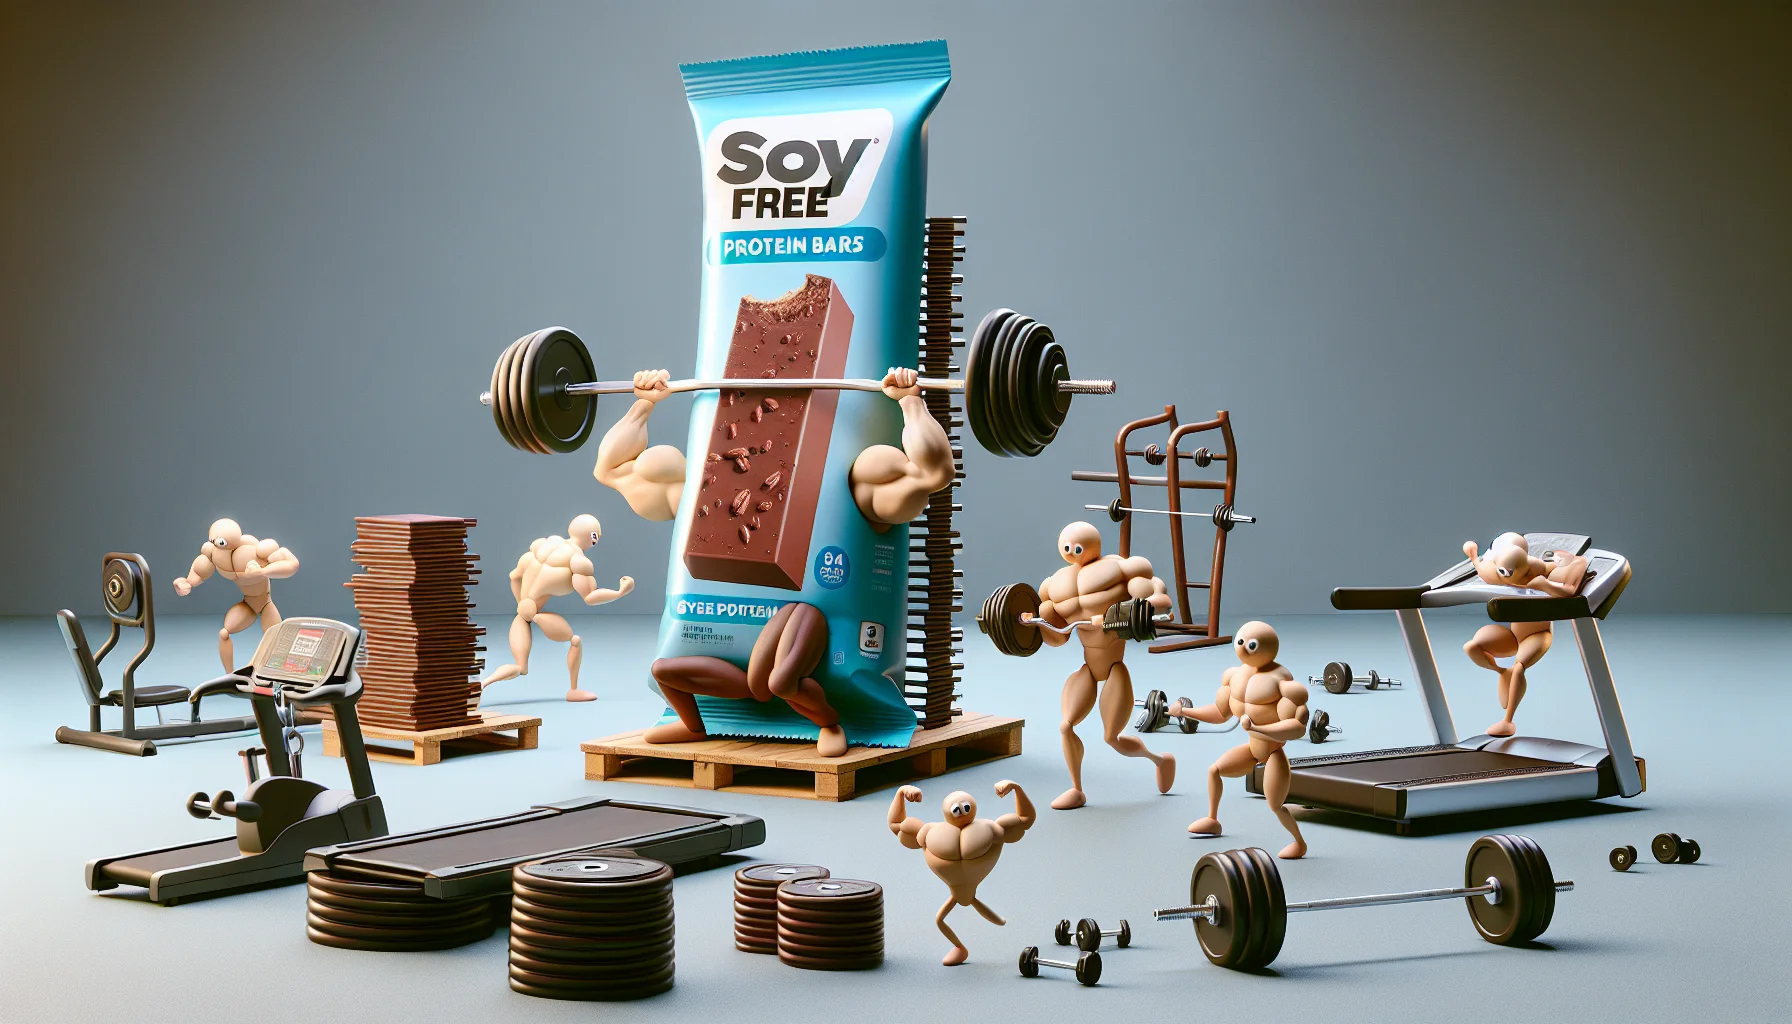 Create a humorous scenario of an animated gym setting where exercise equipment are attempting to pump iron. A pair of dumbbells struggle in vain to lift a colossal weight, while a confused treadmill tries to sprint on its own tracks. Centre stage, a towering pile of soy-free protein bars flexing their 'muscles', eliciting amused looks from the surrounding equipment. This interesting scene suggests the idea that even inanimate objects are captivated by the power of these protein bars, adding a playful and enticing edge to consuming supplements for sports.